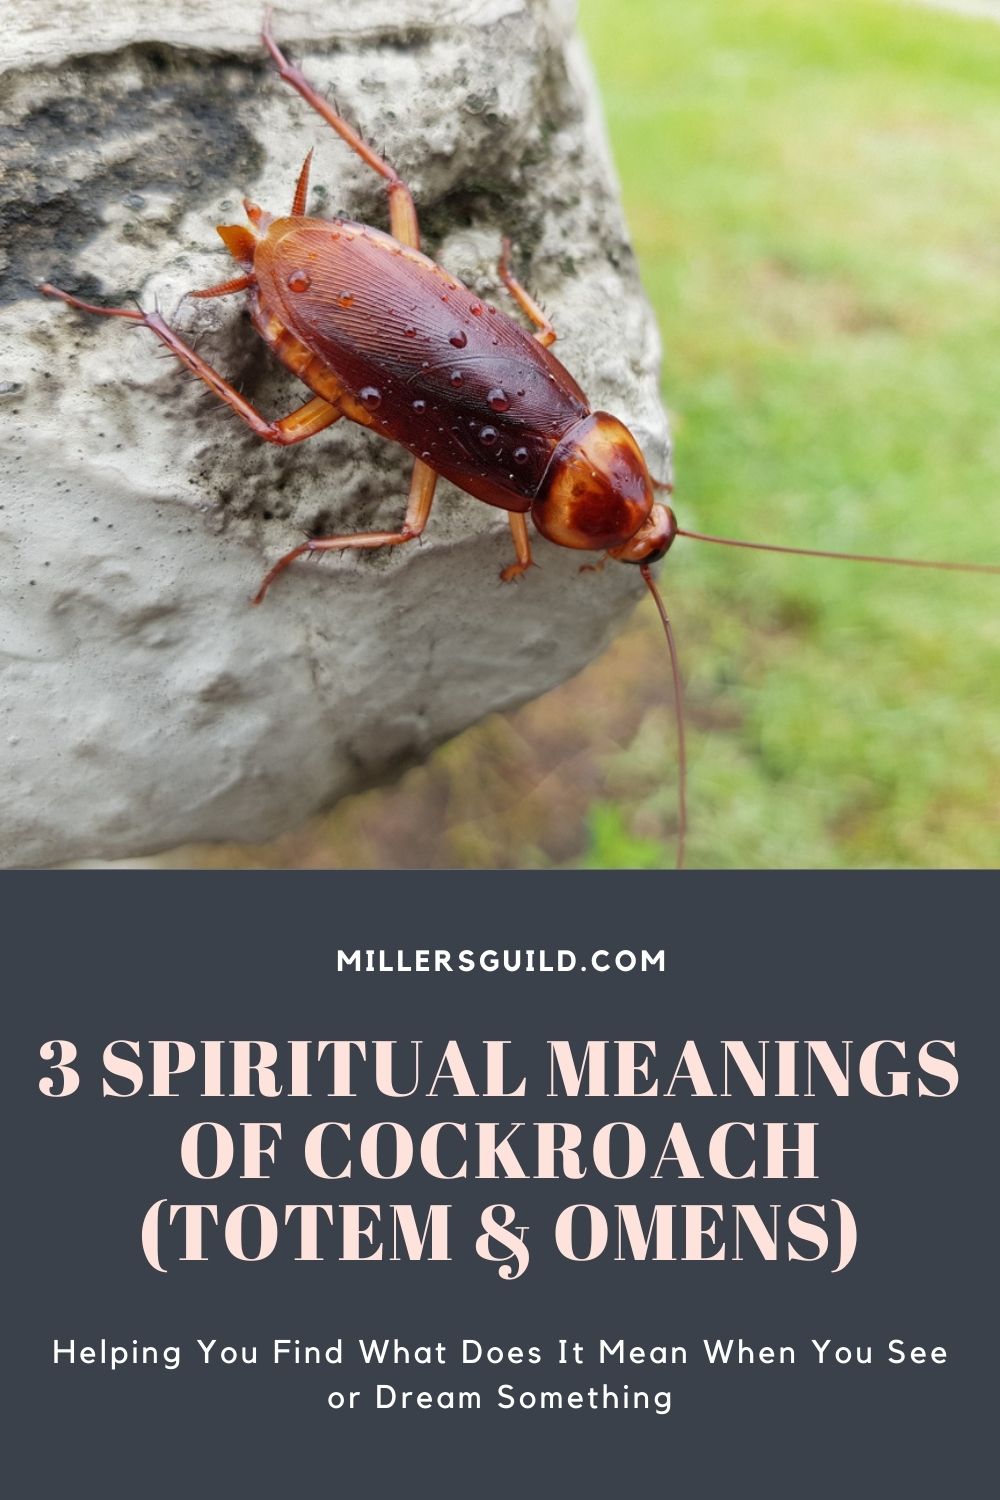 3 Spiritual Meanings of Cockroach (Totem & Omens) 2